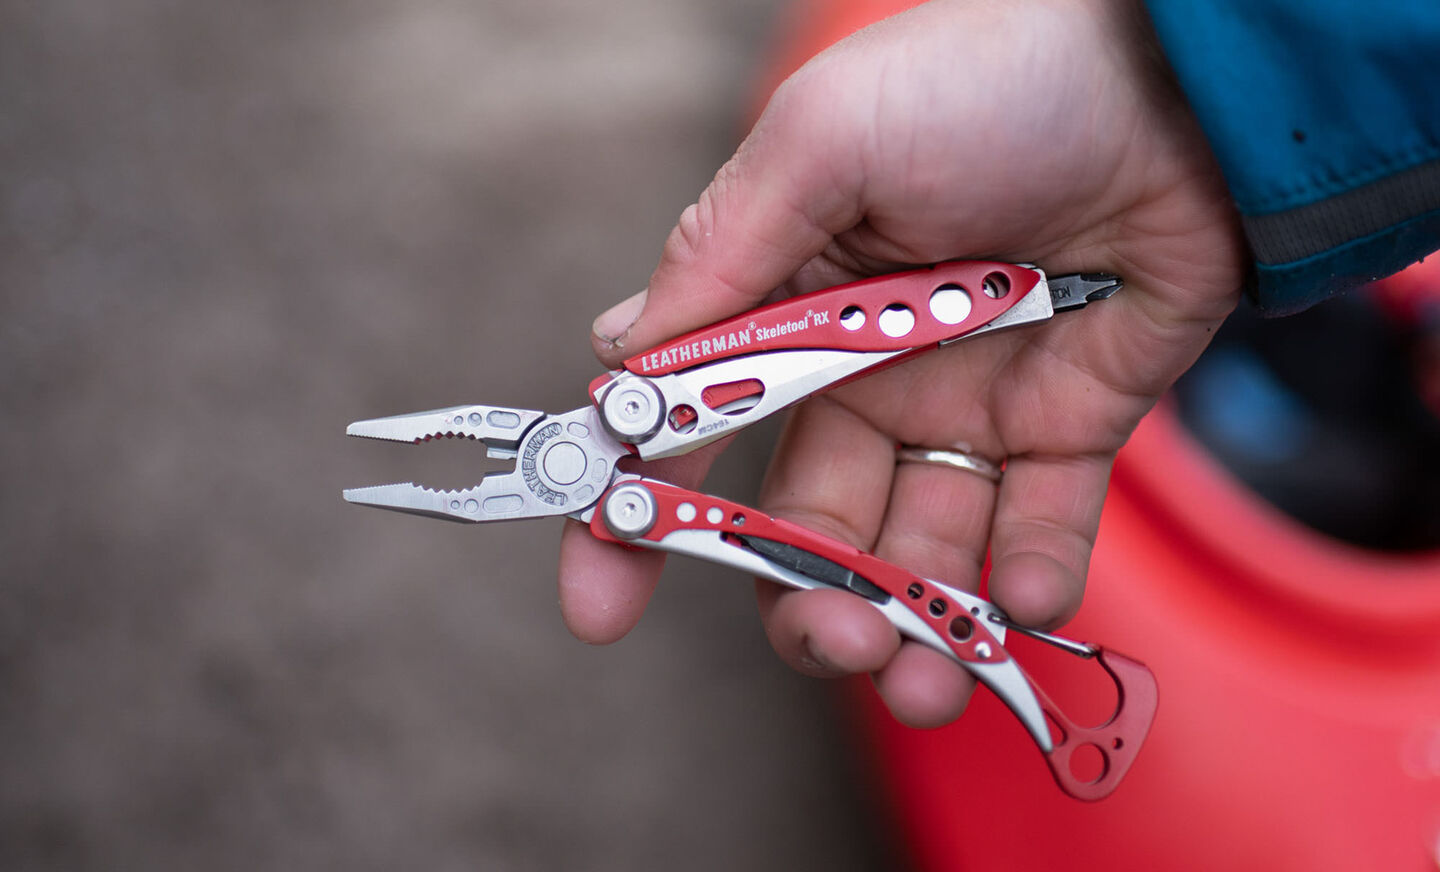 Skeletool RX open in a hand